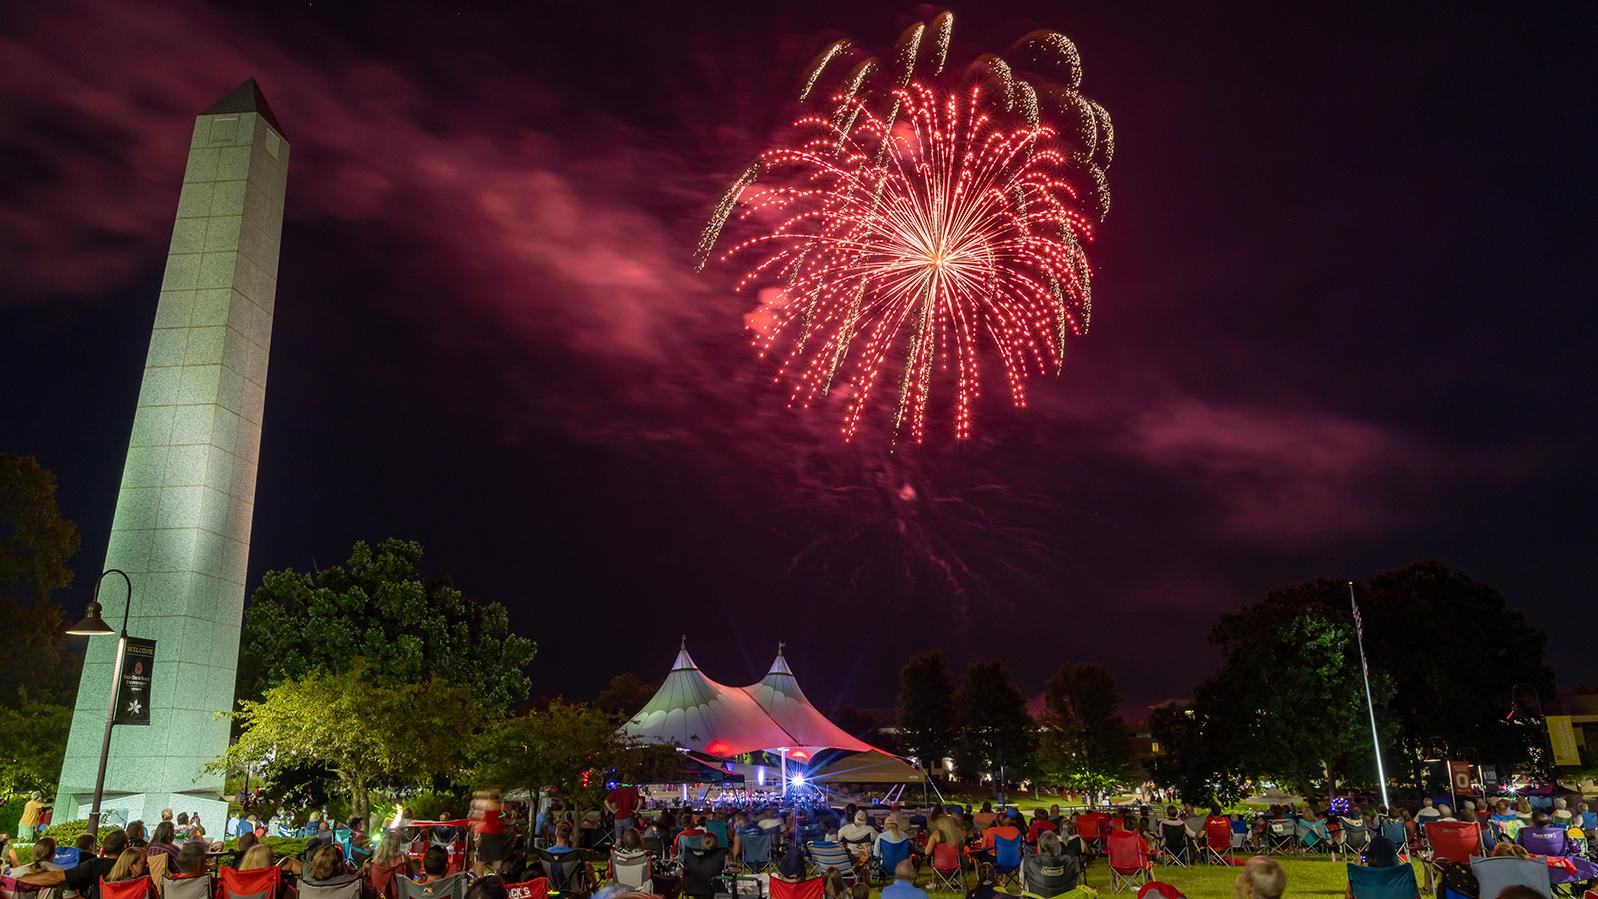 A red firework lights up the sky over a crowd of people on the Newark campus.